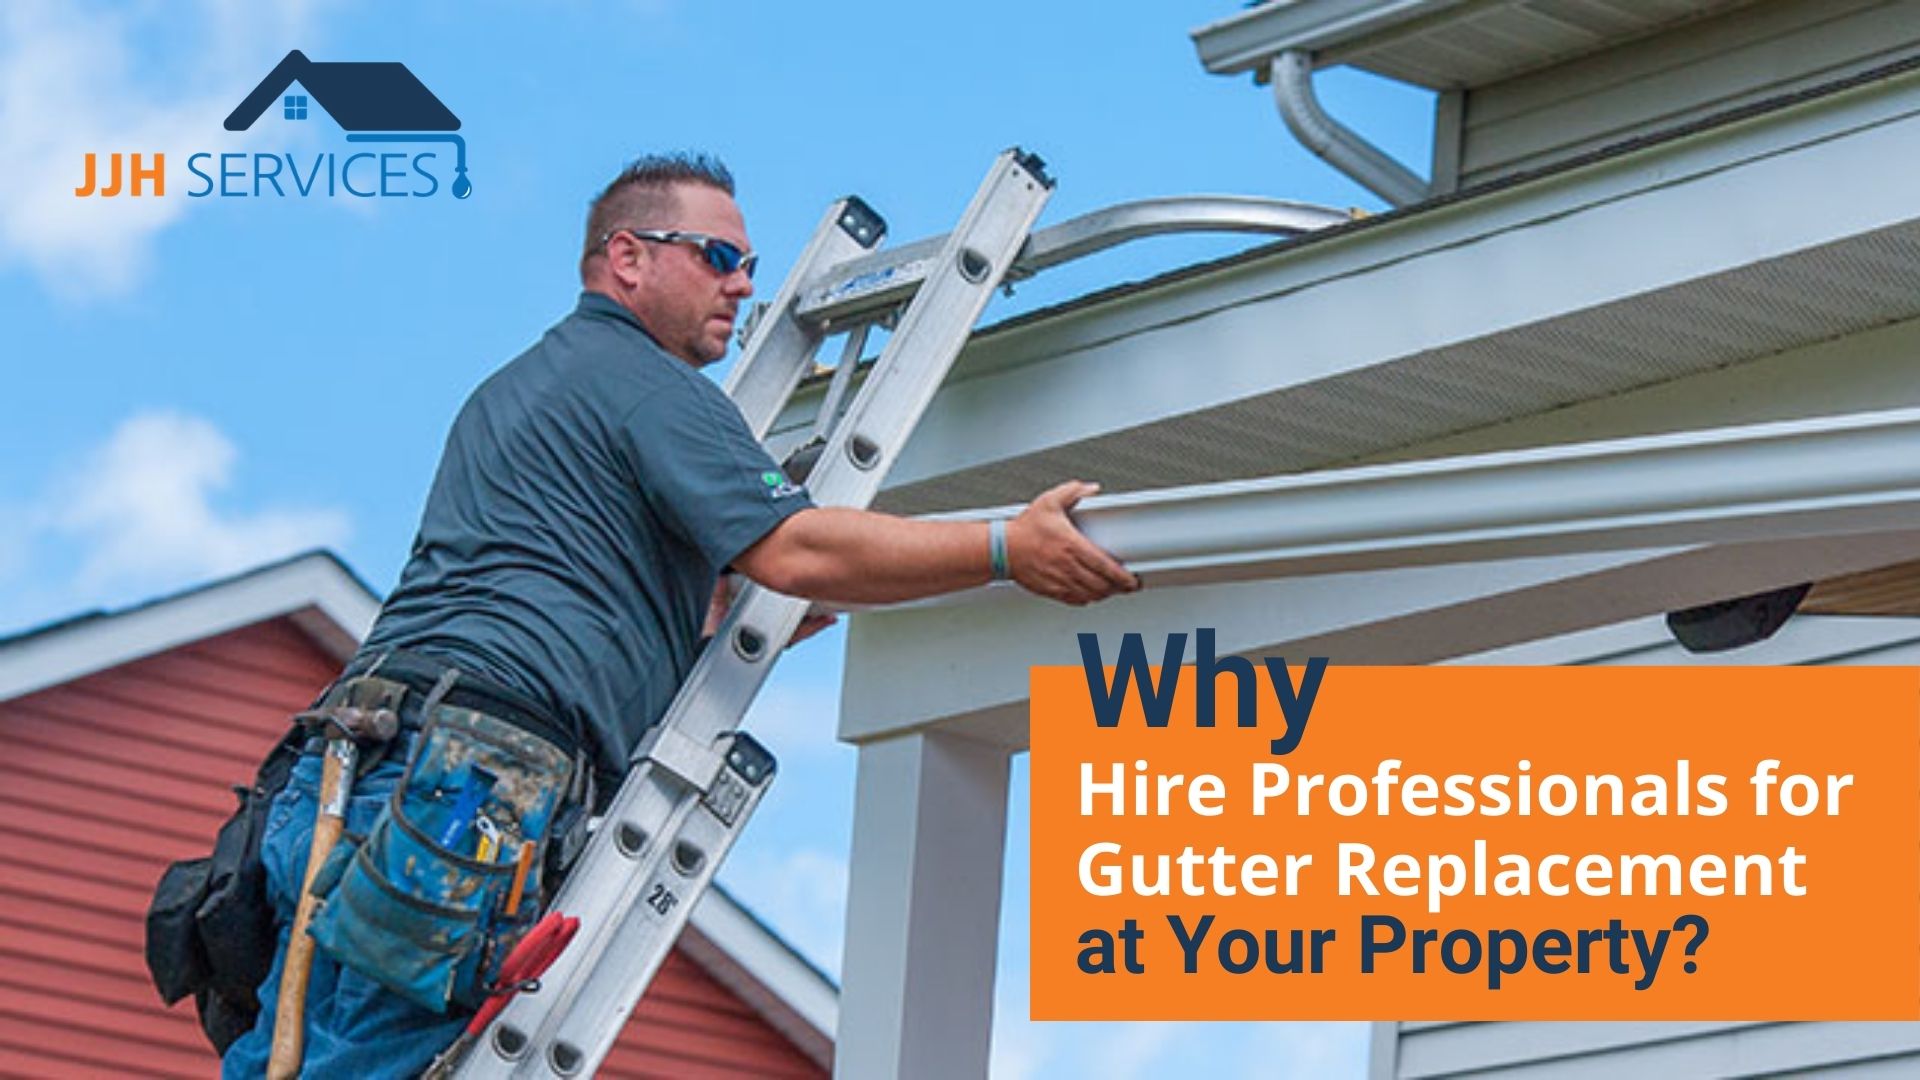 Why Hire Professionals for Gutter Replacement at Your Property?